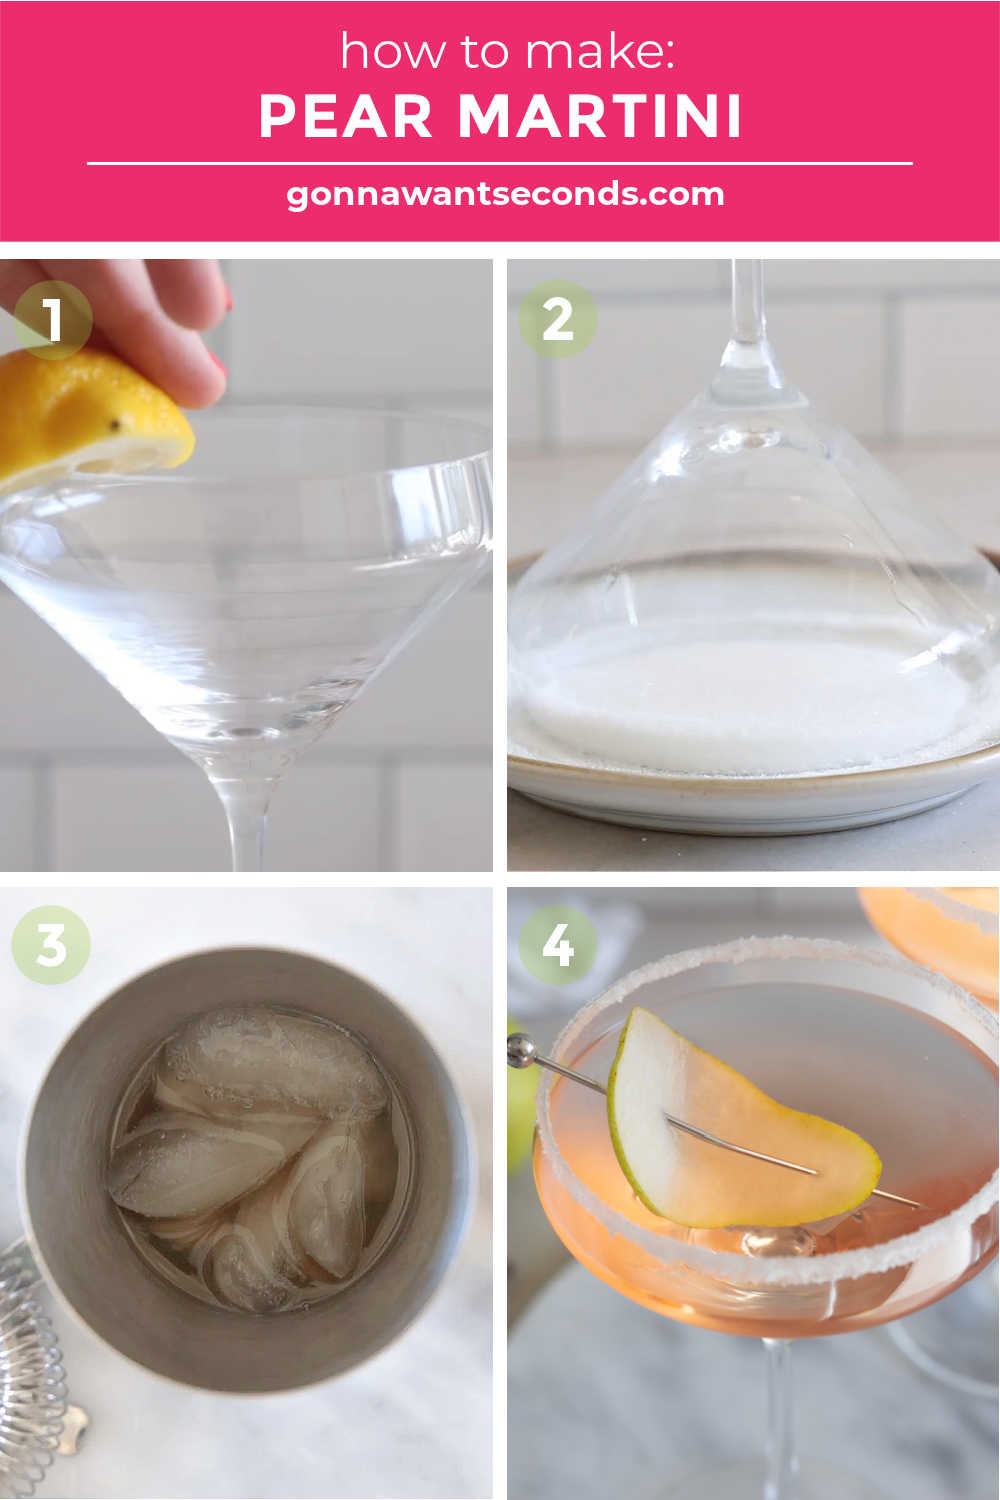 step by step how to make pear martini